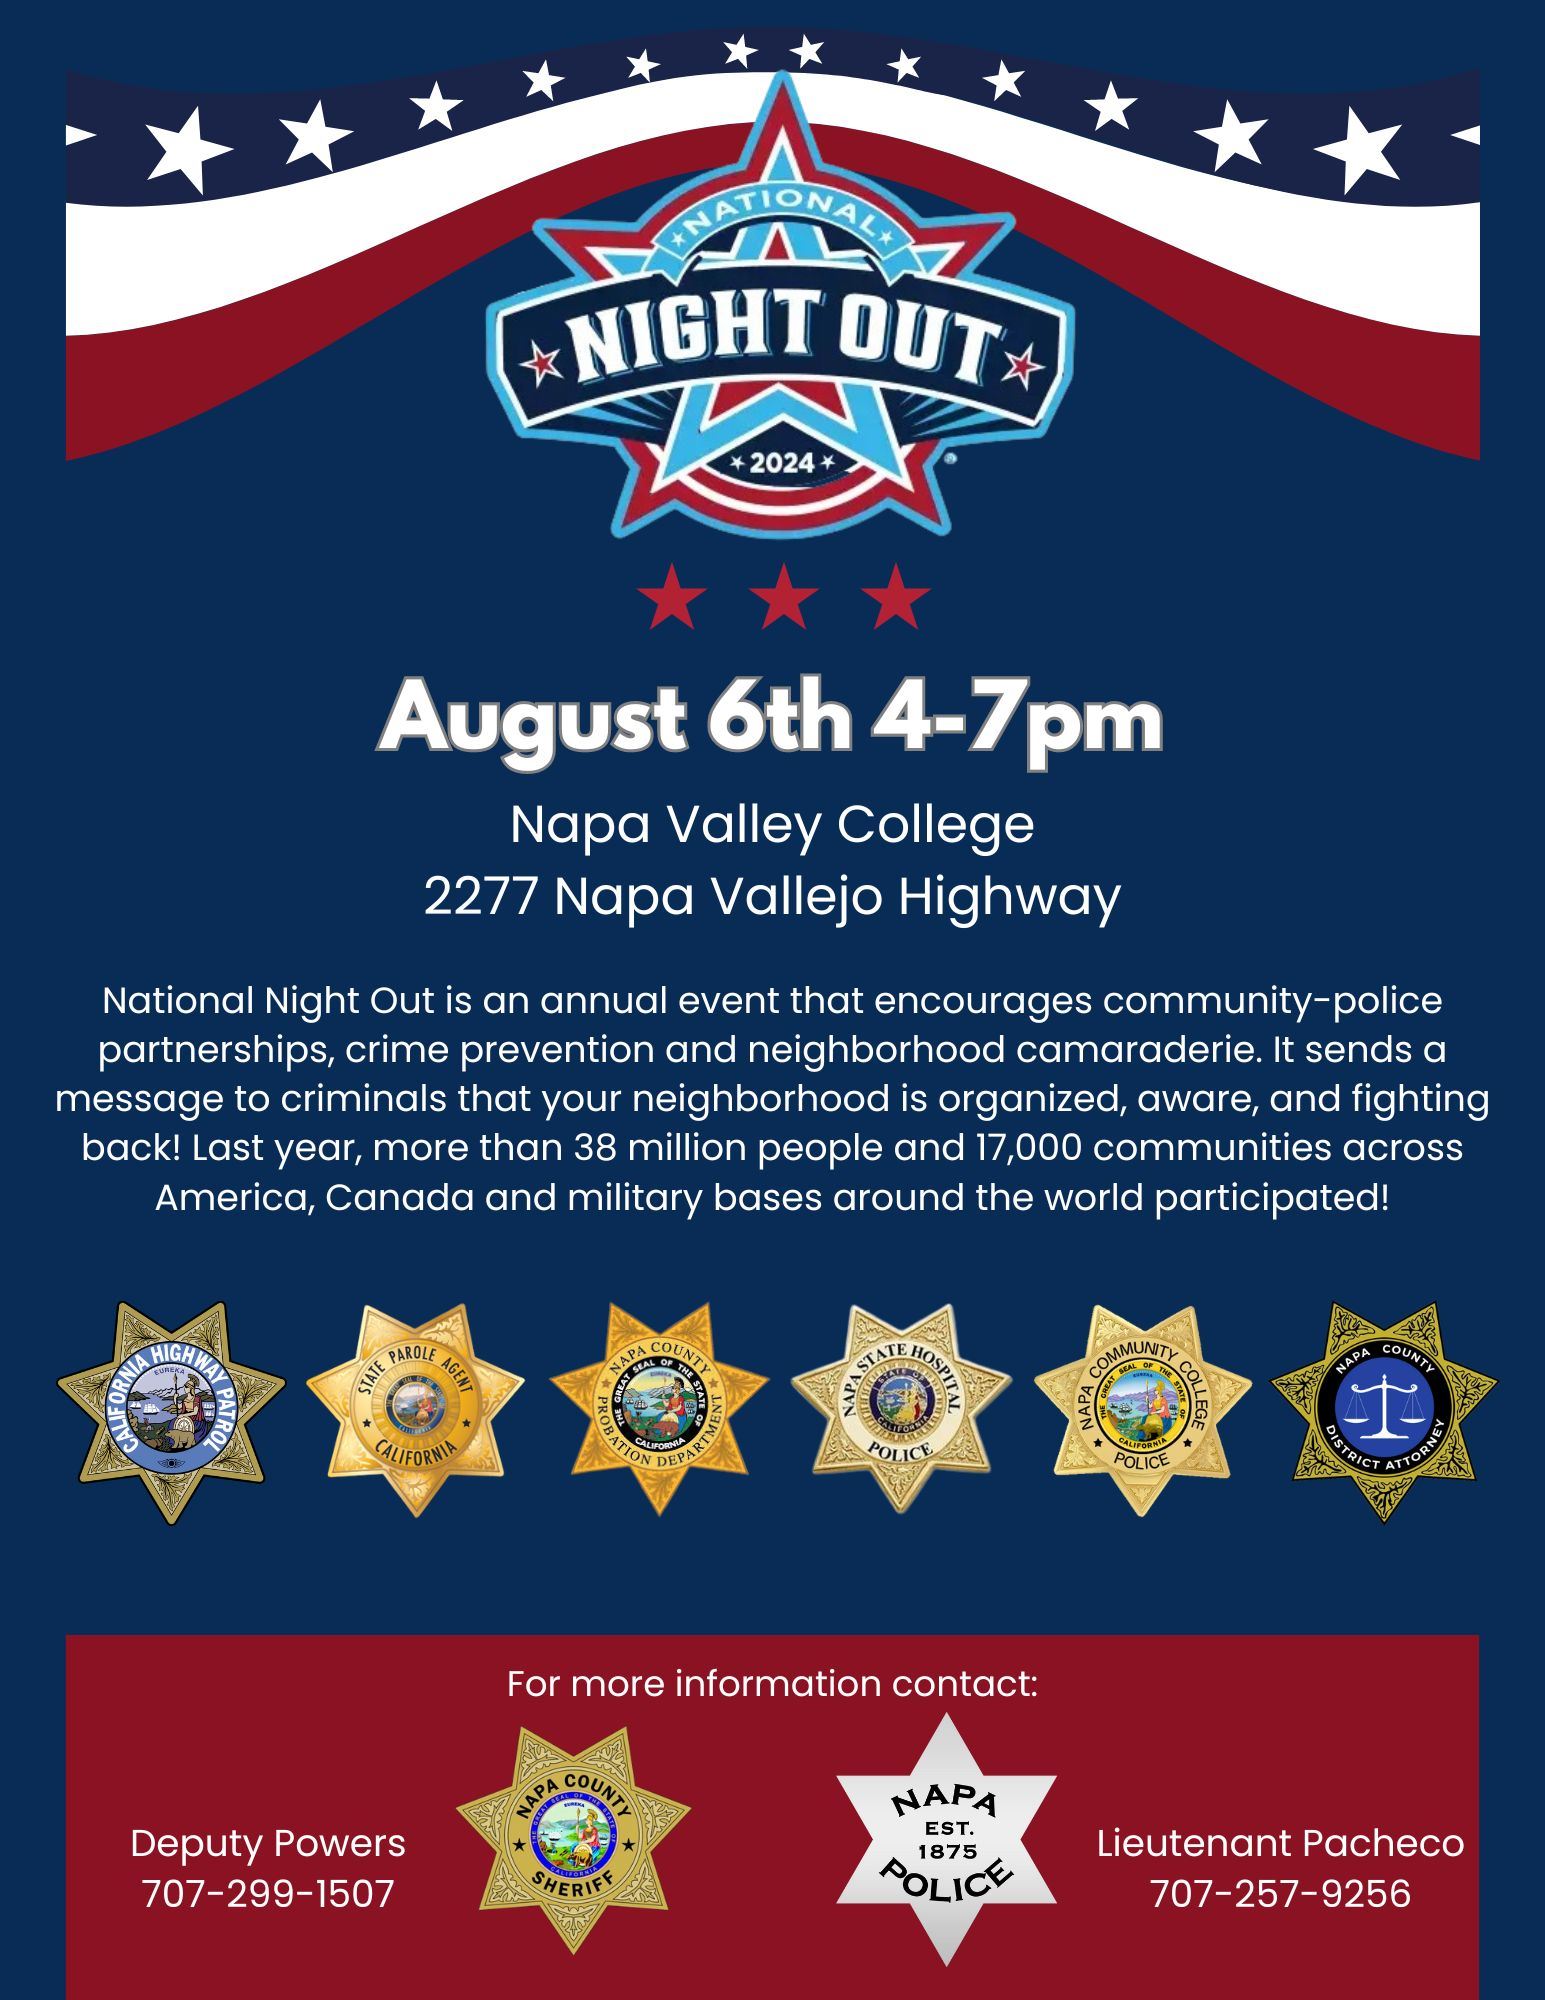 National Night Out is an annual event that encourages community-police partnerships, crime prevention and neighborhood camaraderie